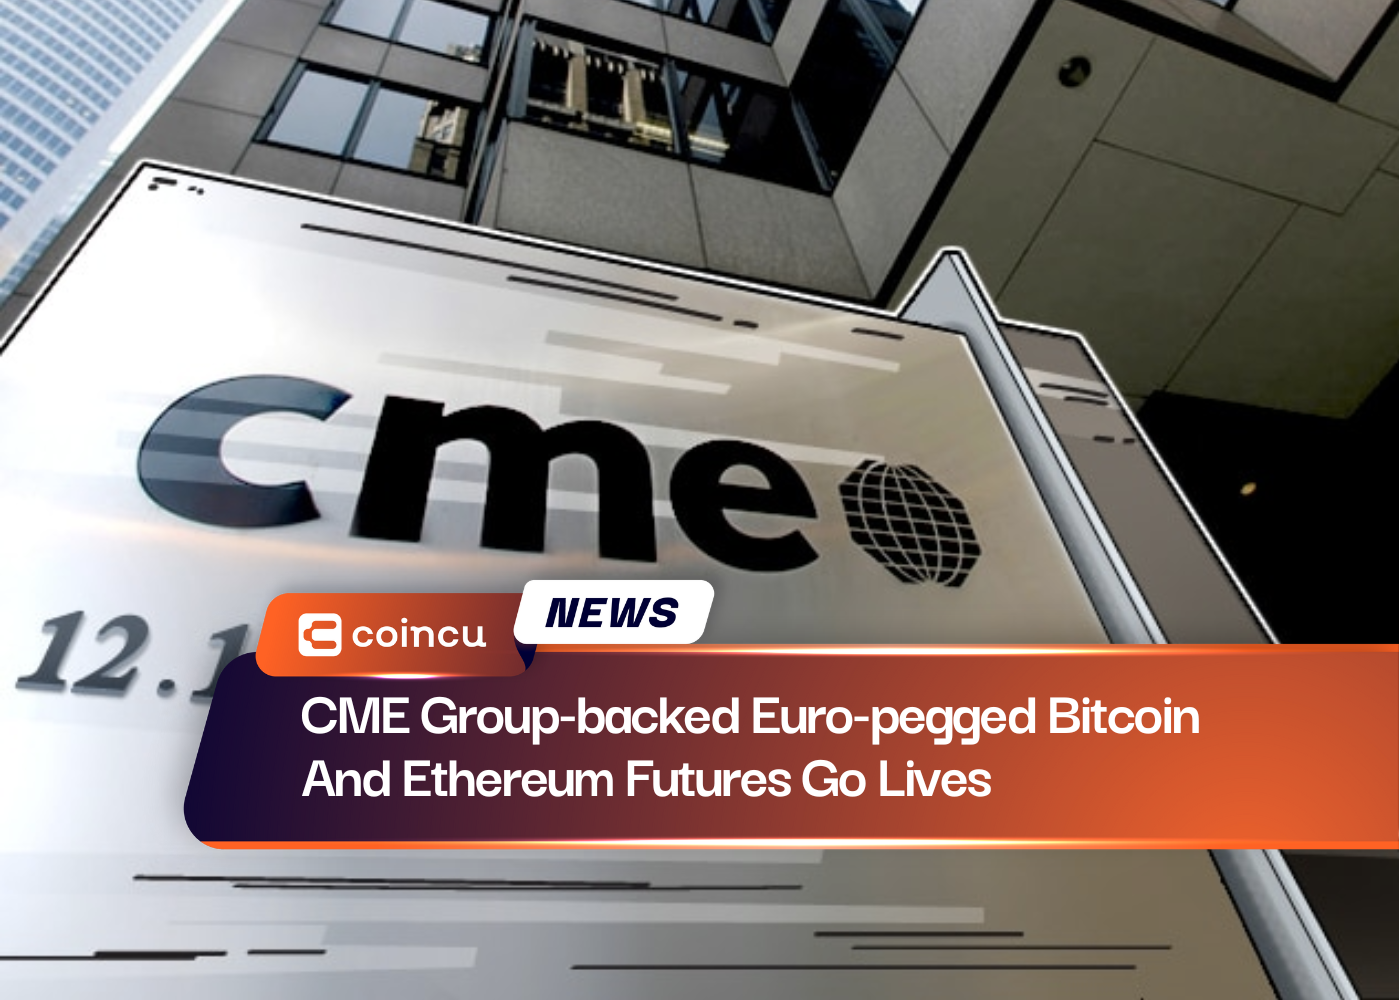 CME Group-backed Euro-pegged Bitcoin And Ethereum Futures Go Lives